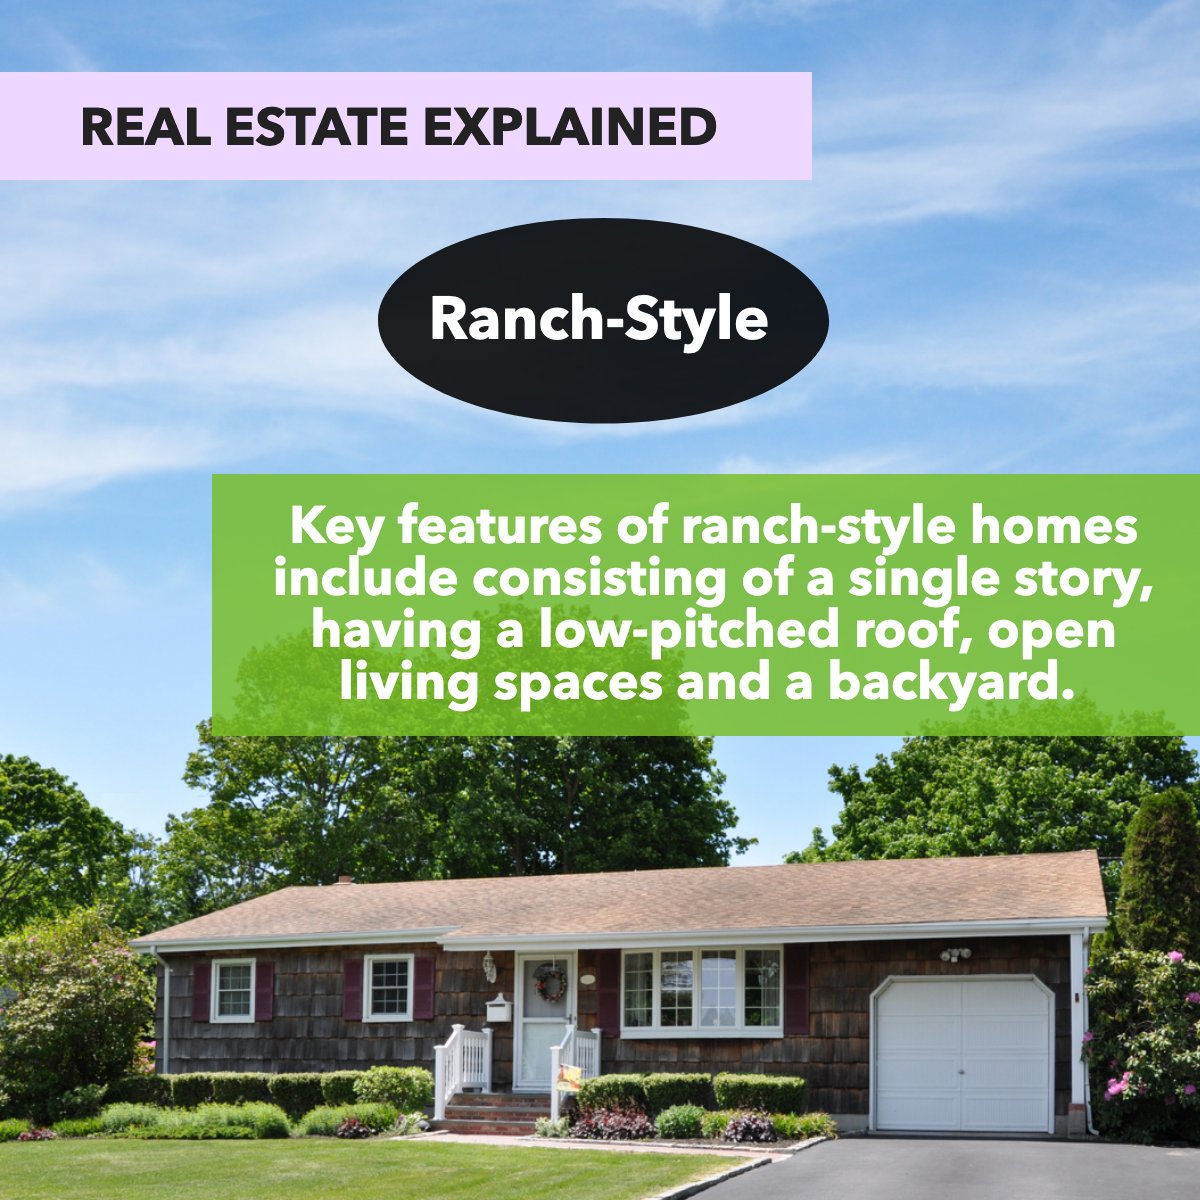 Ranch-style houses are now the most commonly searched-for style of home in the United States. 🏘️

#ranchostyle    #ranchhousestyle    #ranchstylehomes
#yourhomesoldguaranteed #indyrealestate #fanishaknowsindydotcom #startpacking #homeownership #realestate